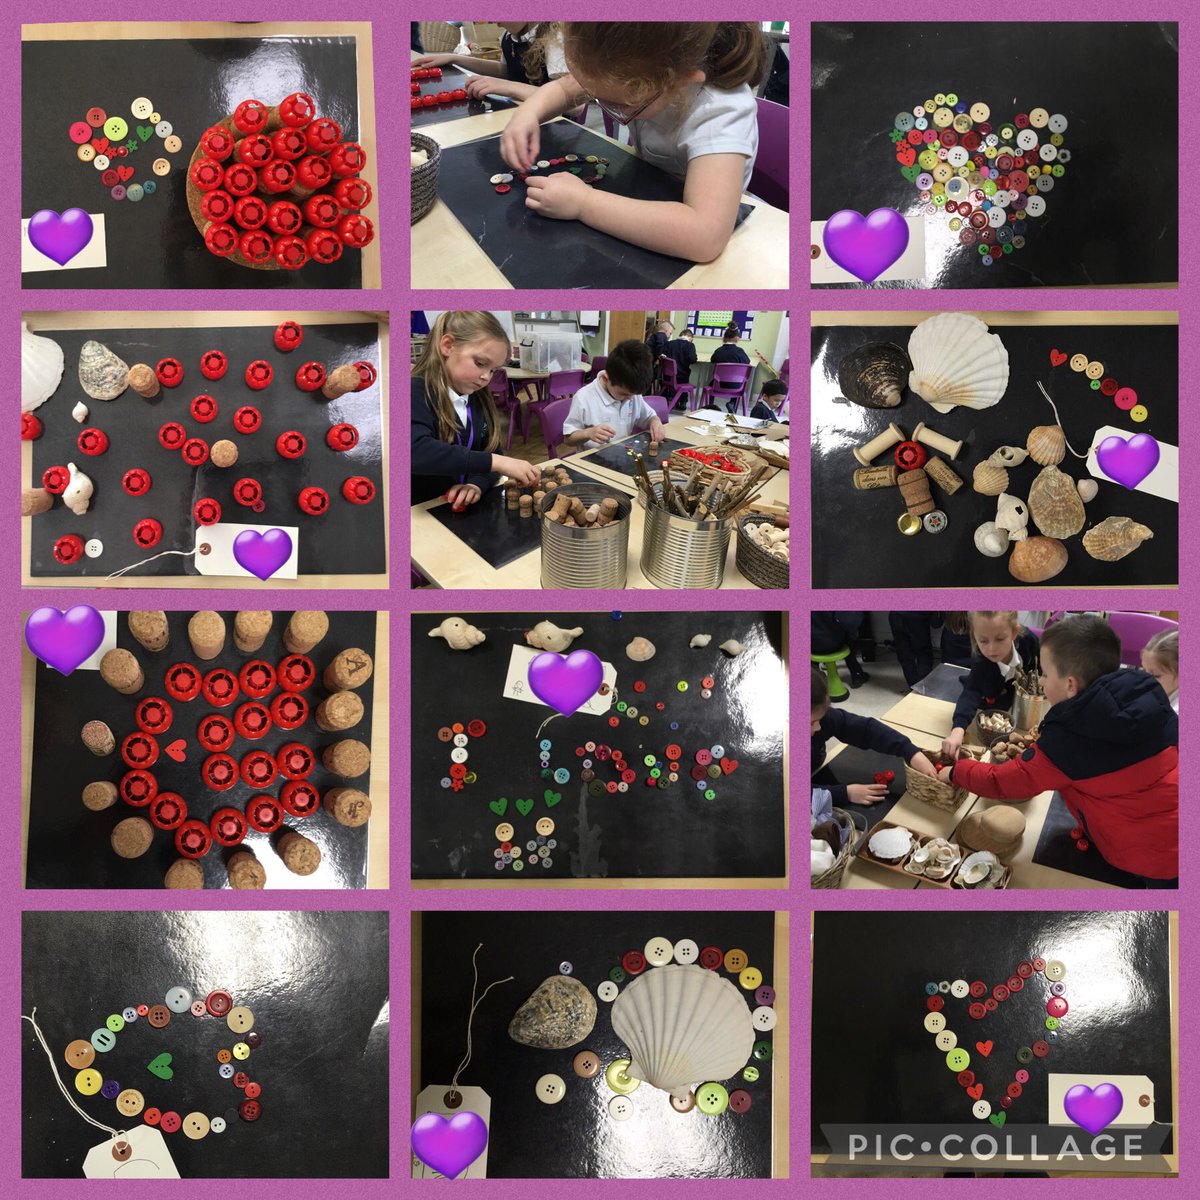 ‘Think make link’ Dosbarth Un used loose parts to represent what community means to them. Take a look at our different interpretations of community! #jppsthrive #jppsinspire